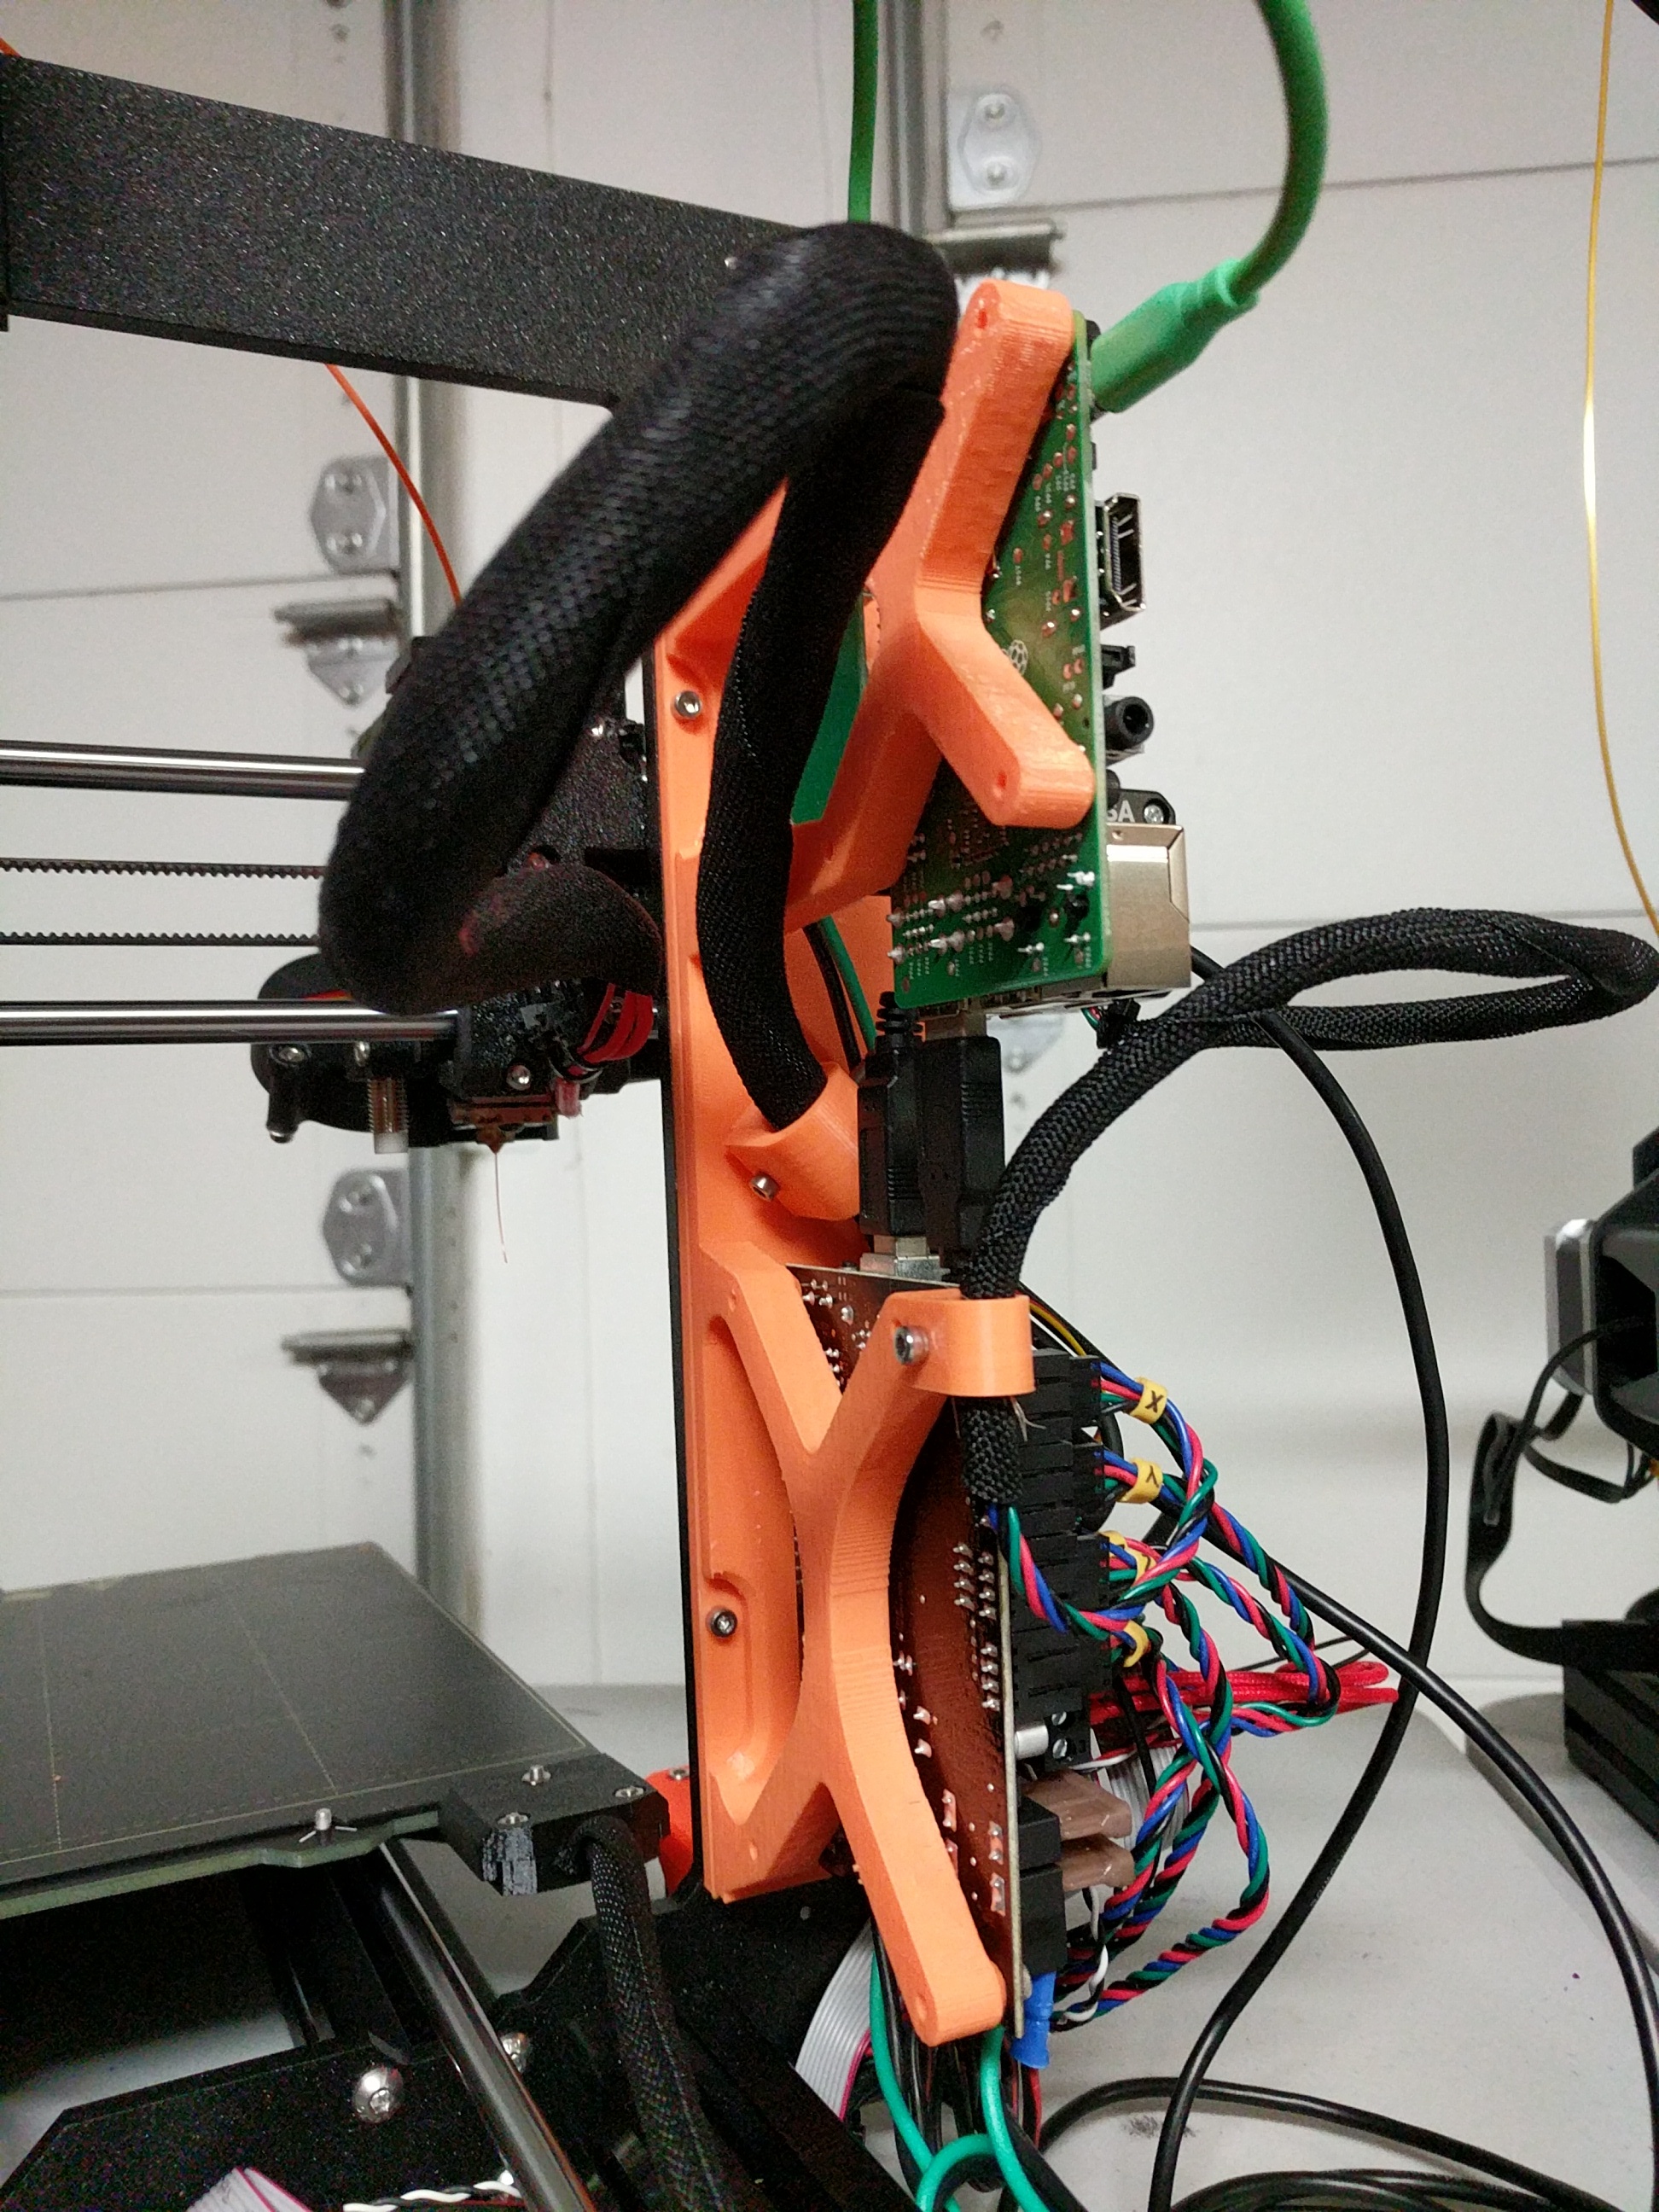 Mount for Raspberry Pi 3 on Prusa MK3S.